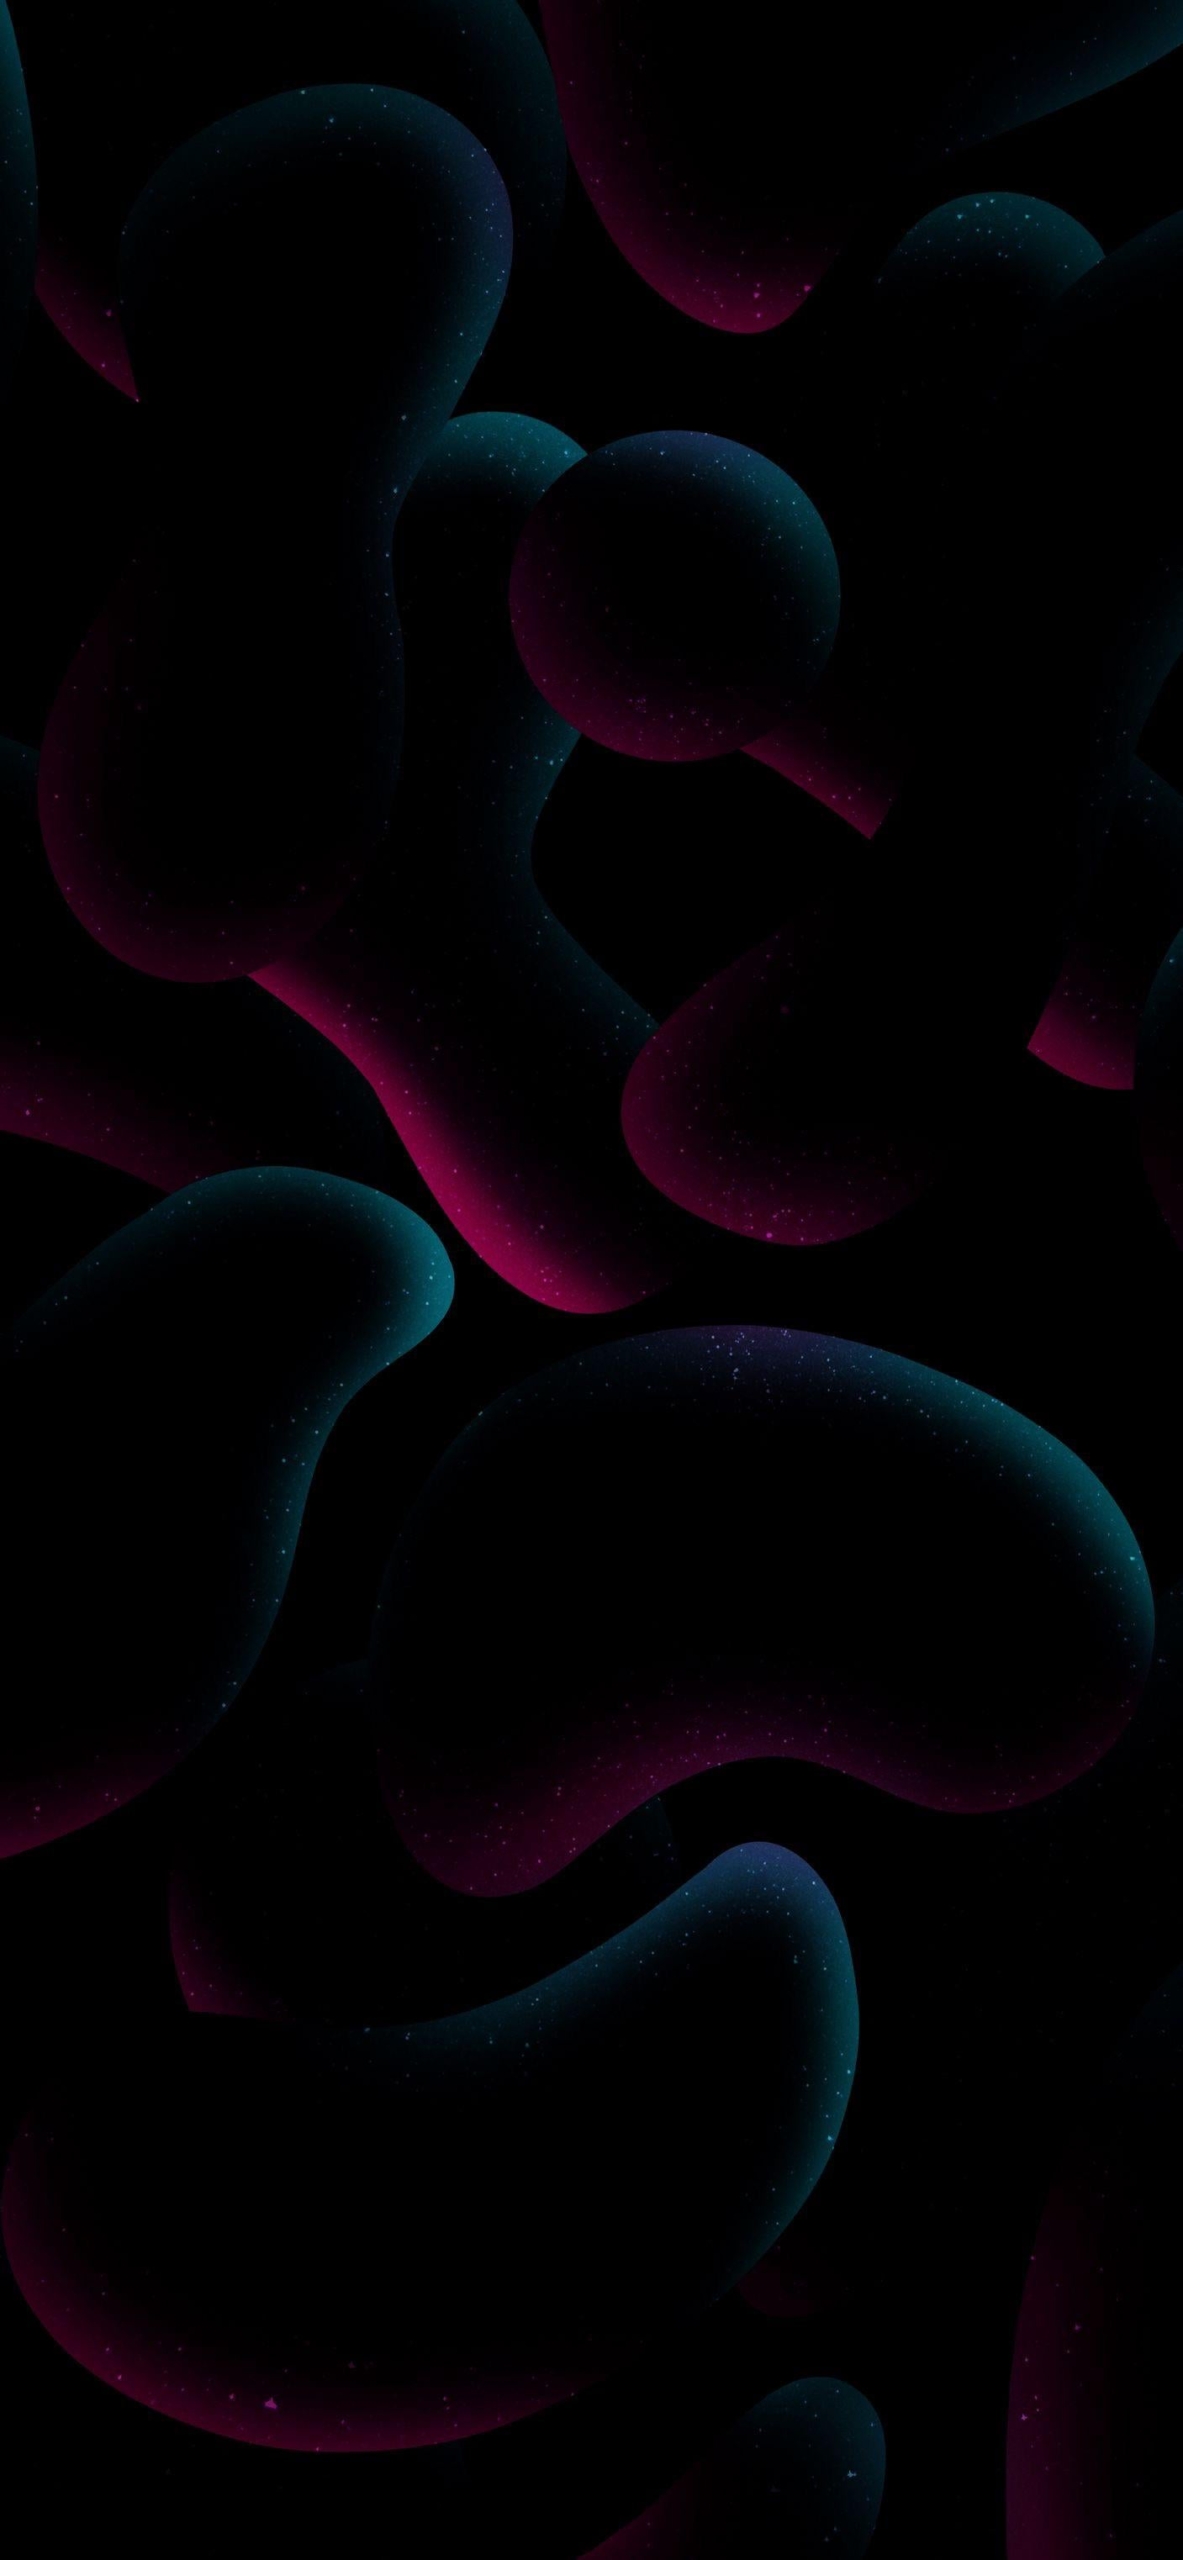 Neon Abstract 4K Wallpapers